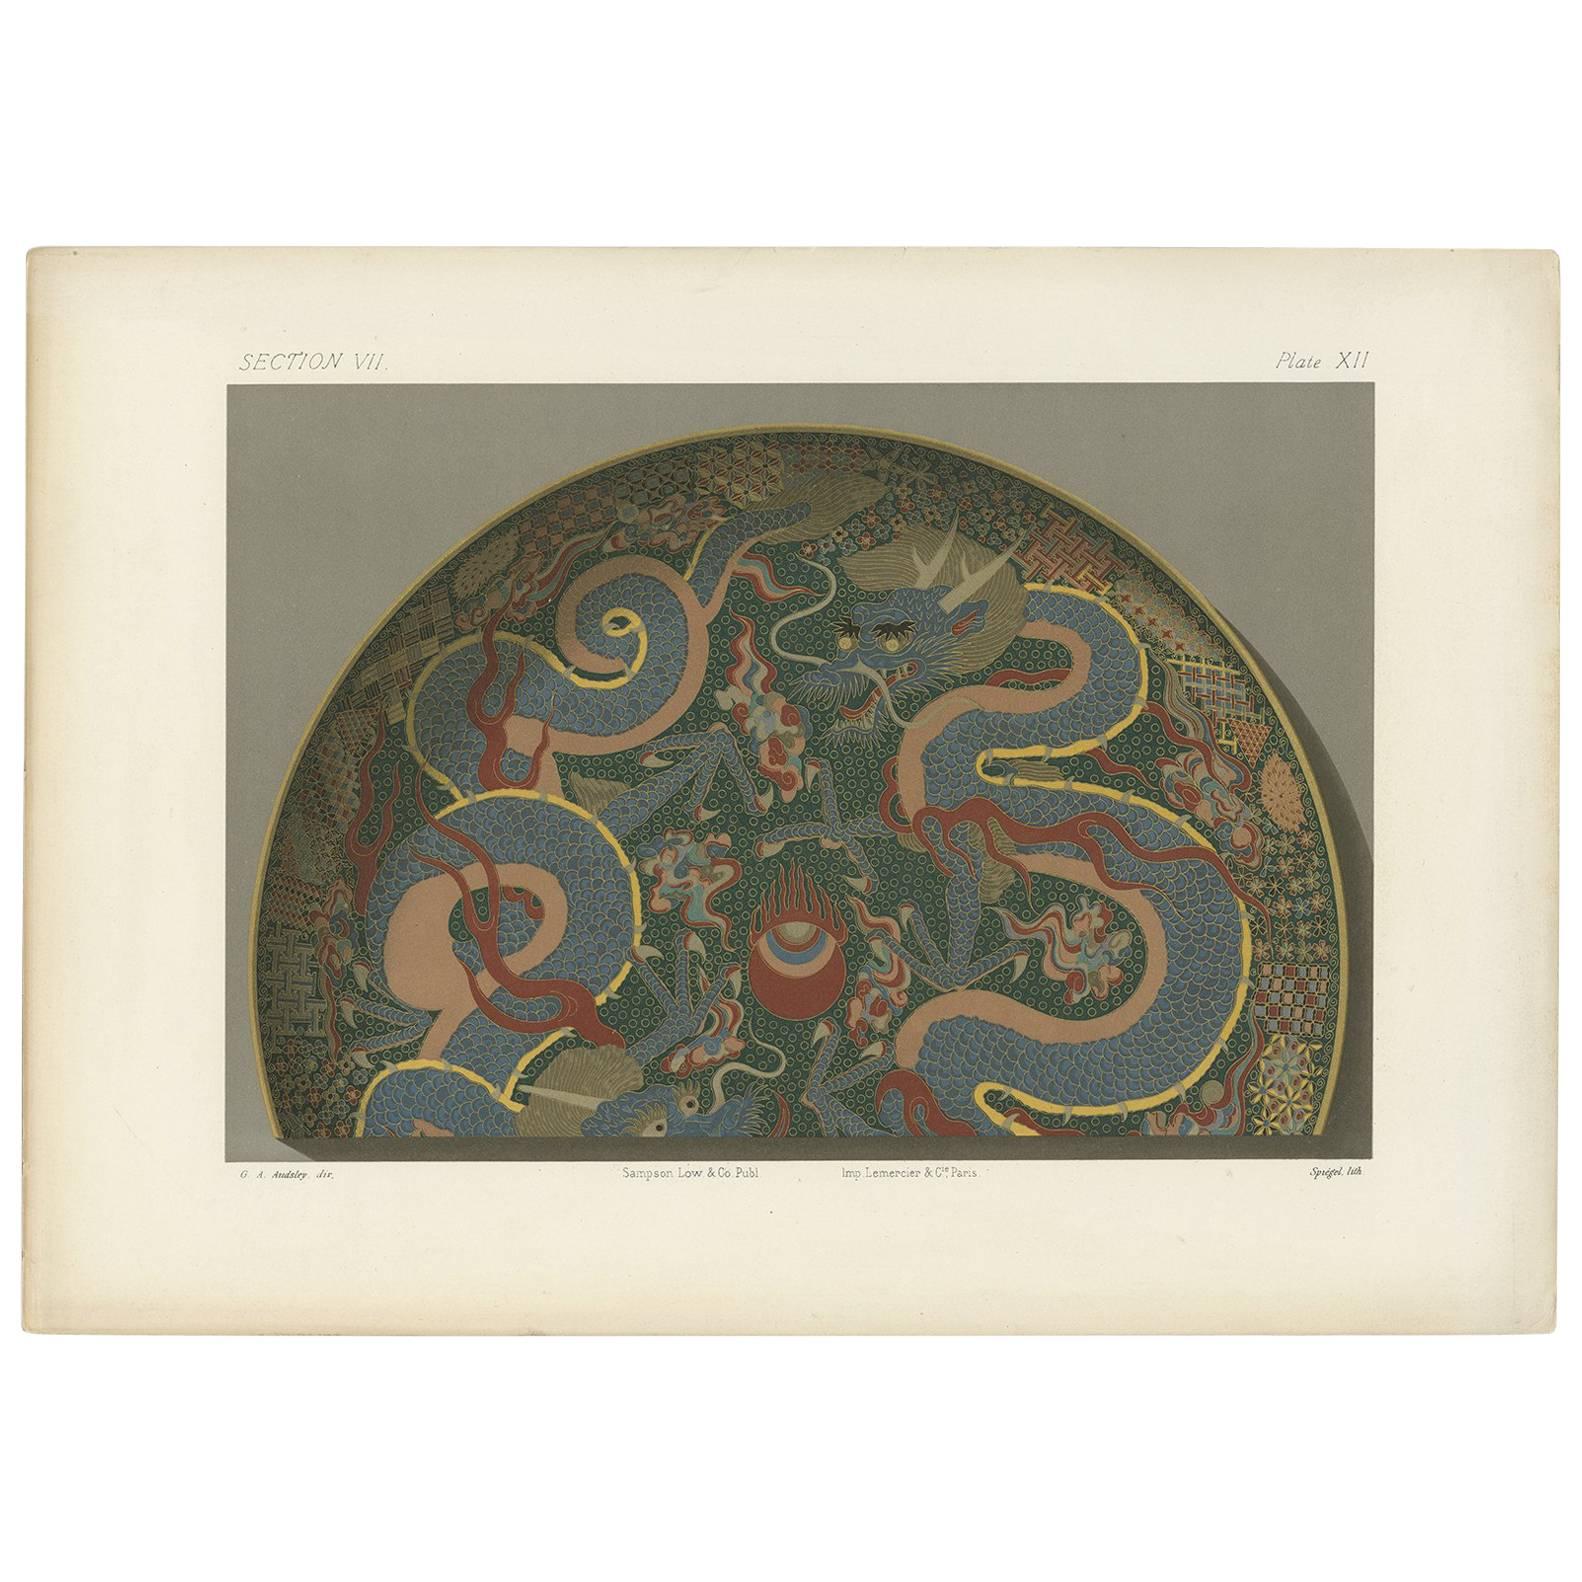 Antique Print of a Sara 'Japanese Dish' by G. Audsley, 1884